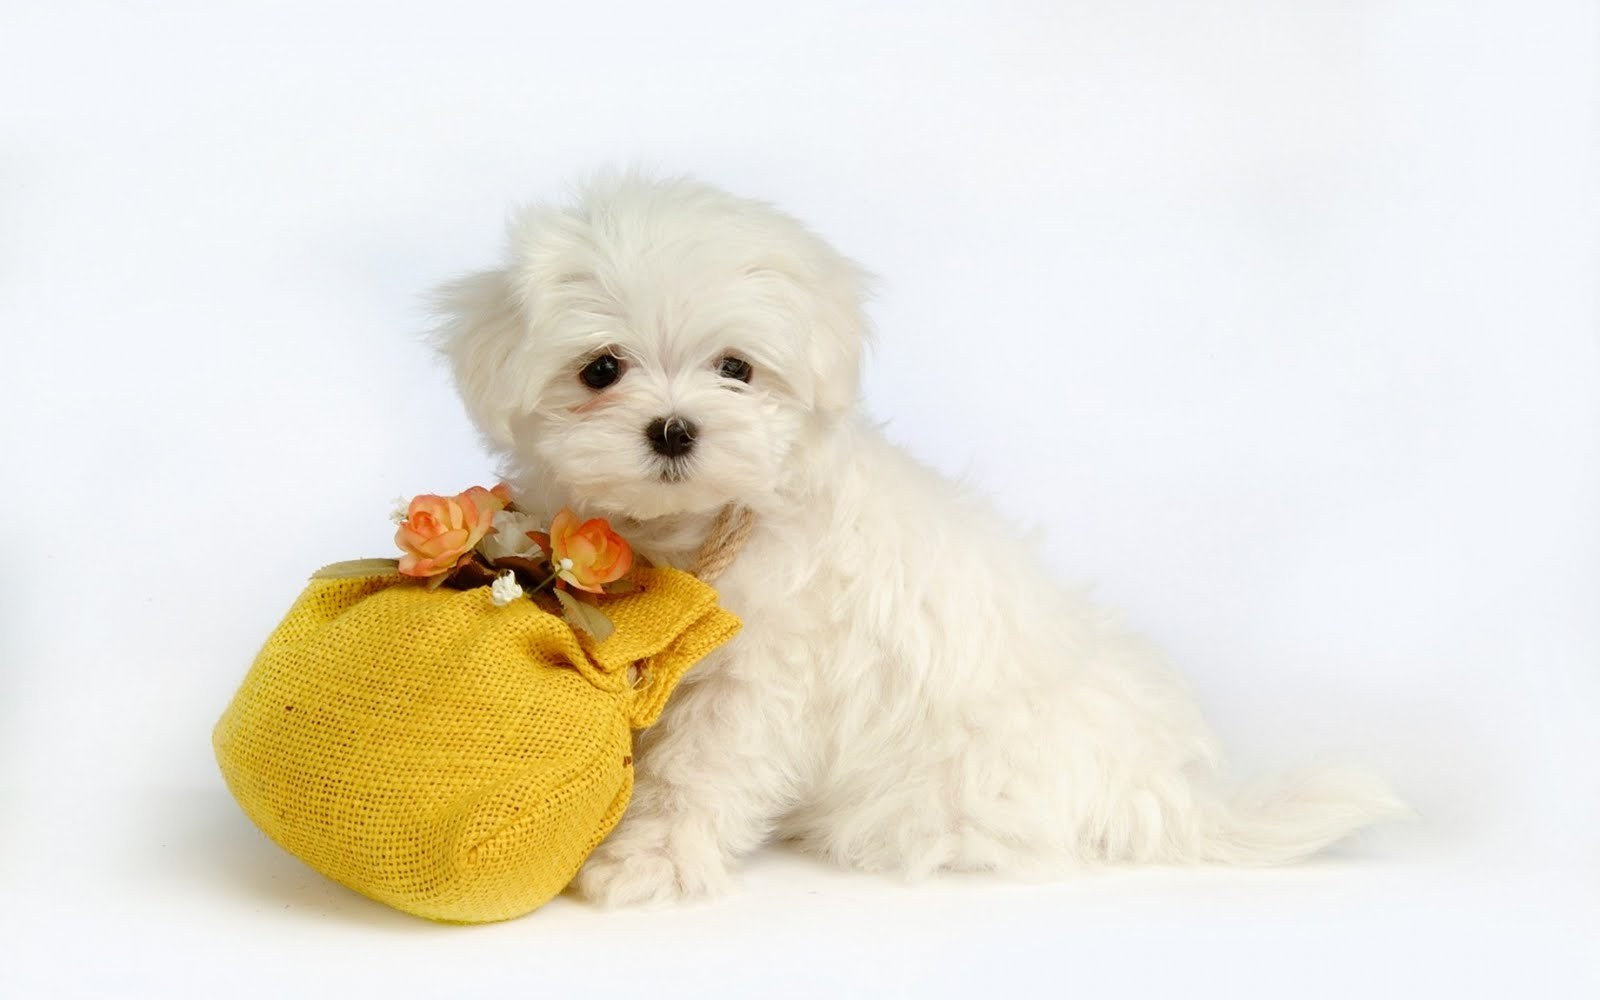 Puppies images Cute Puppy wallpaper photos